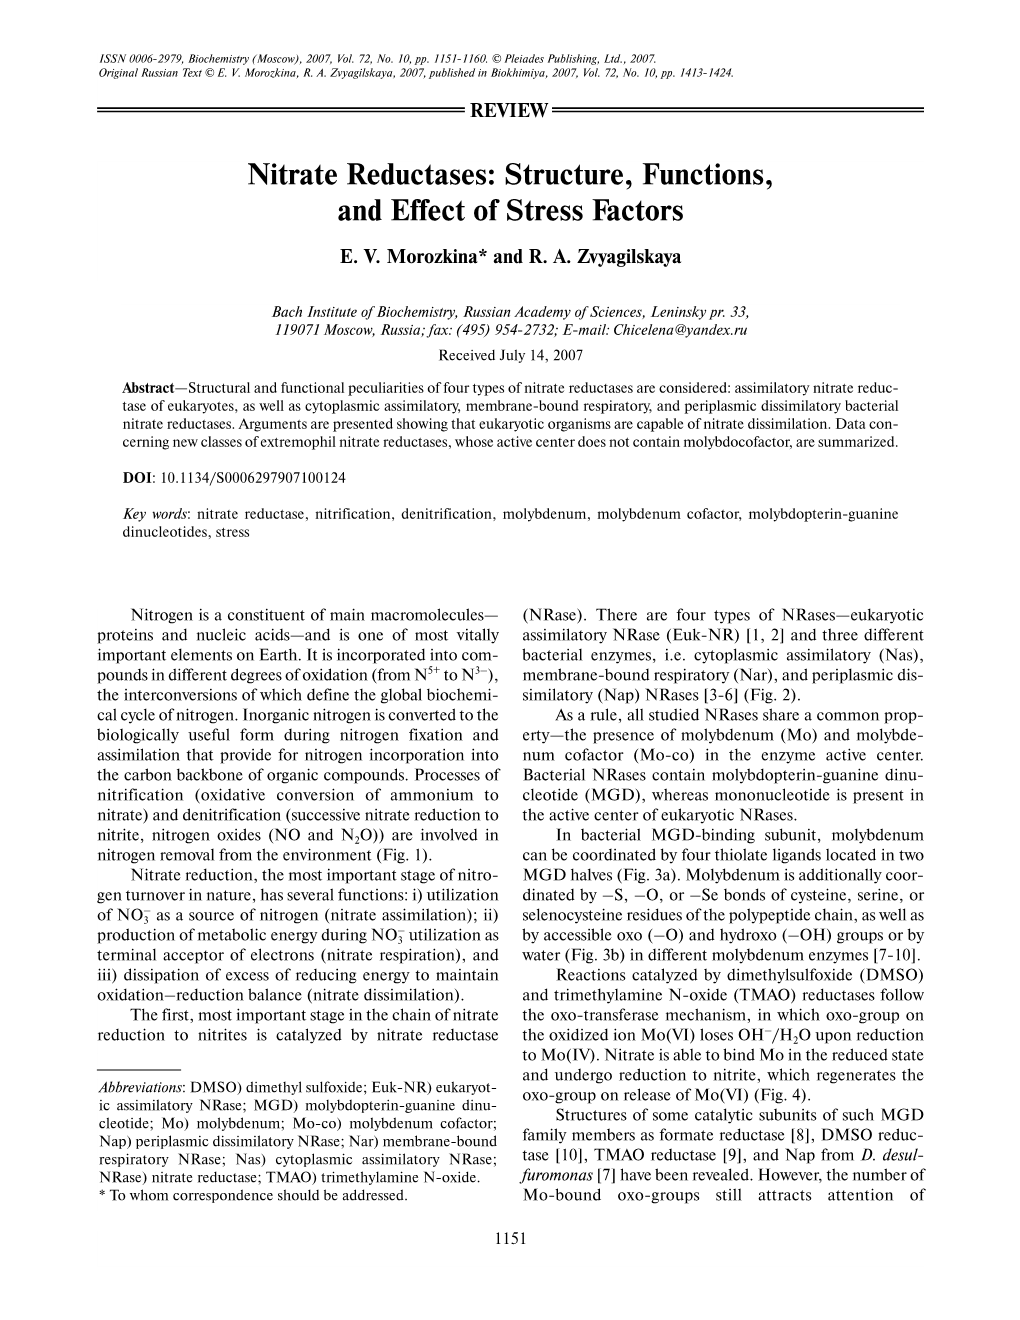 Nitrate Reductases: Structure, Functions, and Effect of Stress Factors